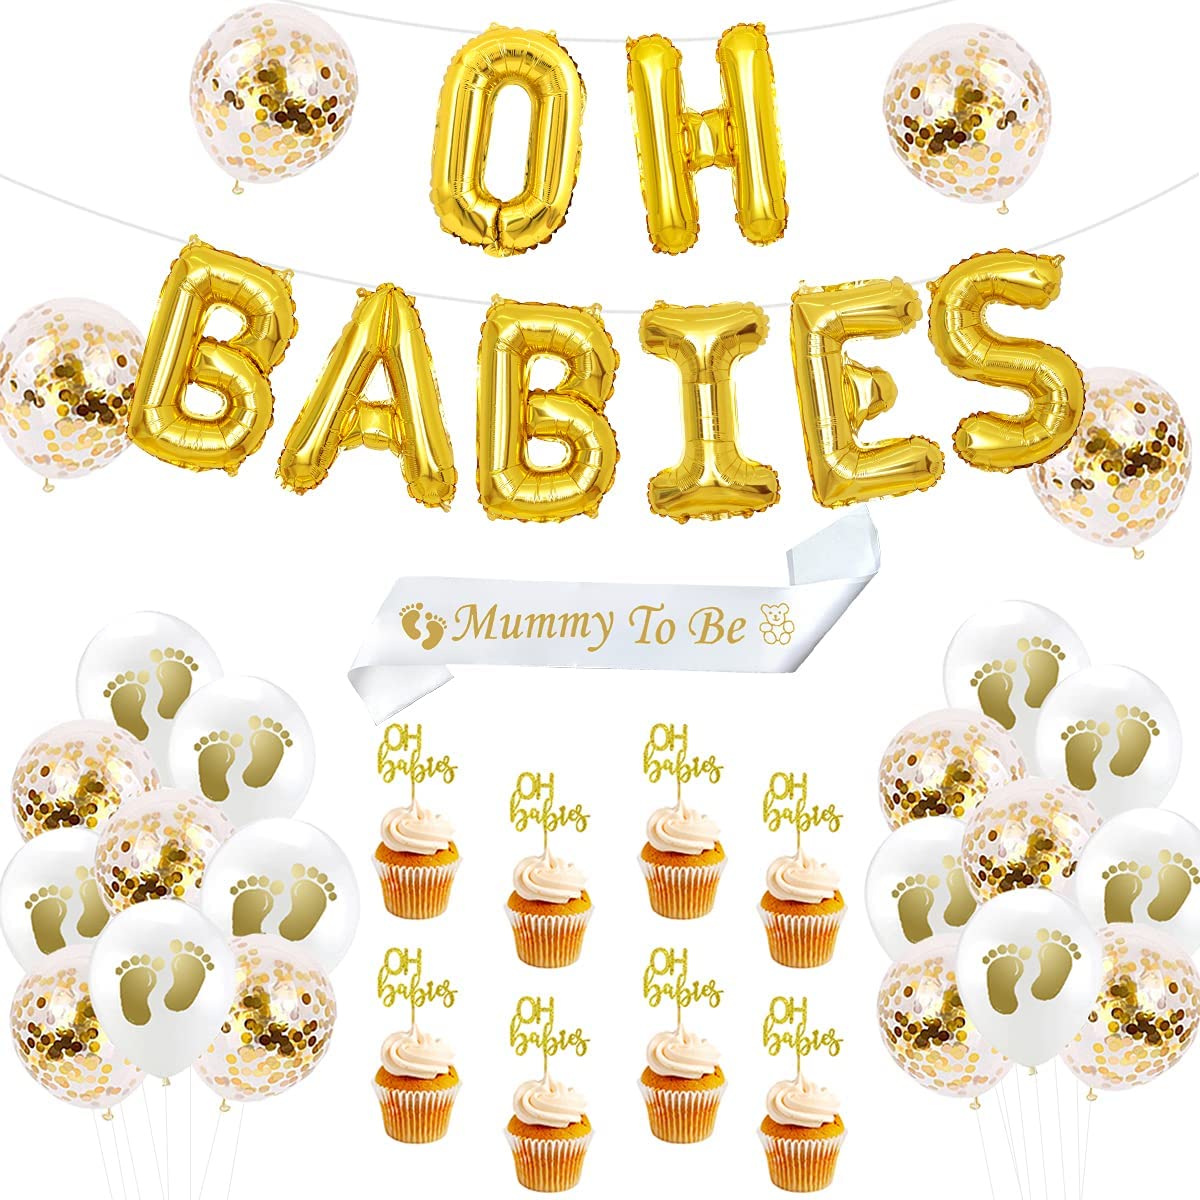 Details about   Oh Babies Balloons Twins Baby Shower Banner Party Supplies Decorations Gender... 